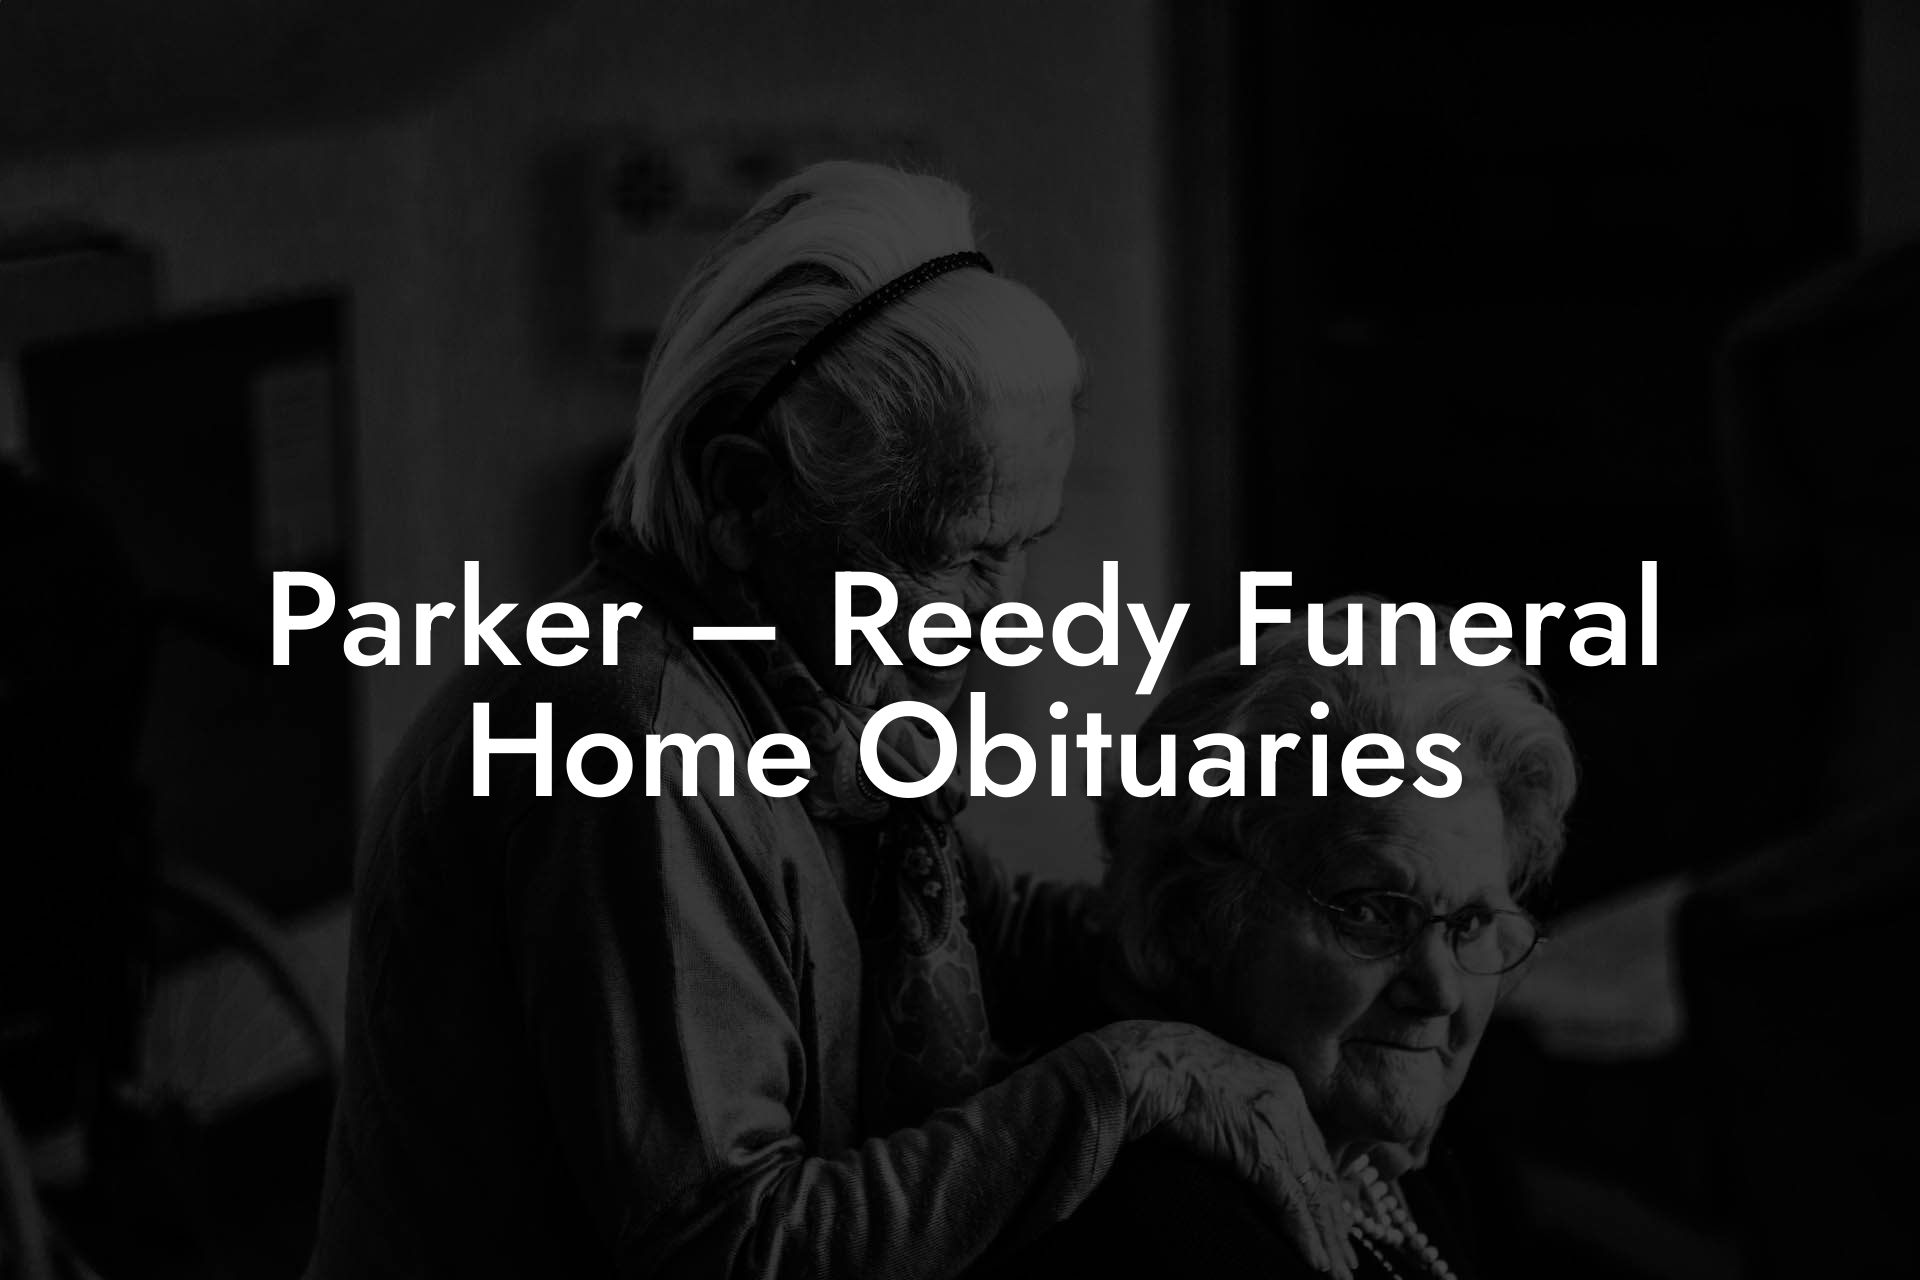 Parker – Reedy Funeral Home Obituaries